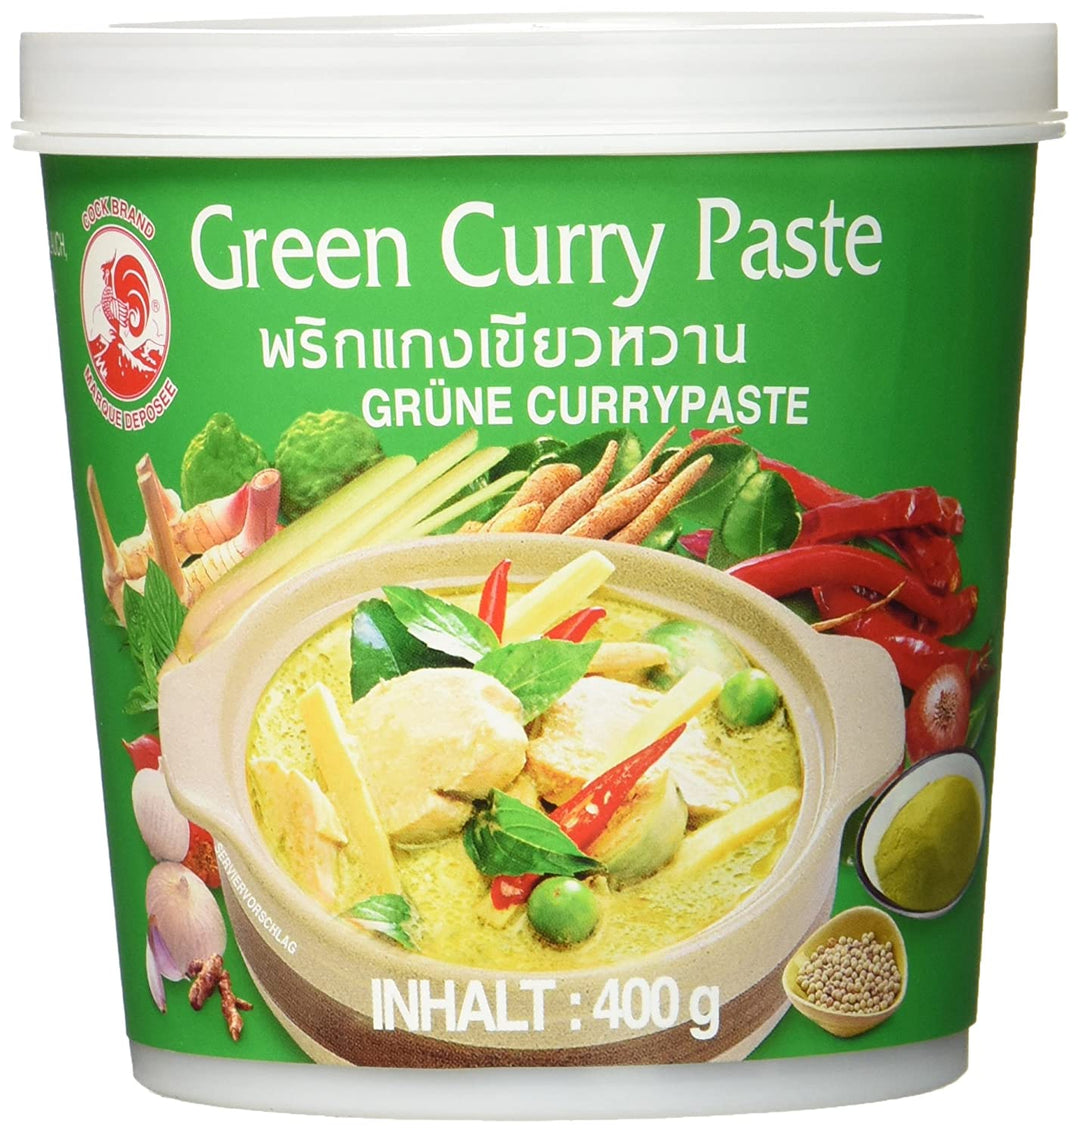 COCK green curry paste 400g